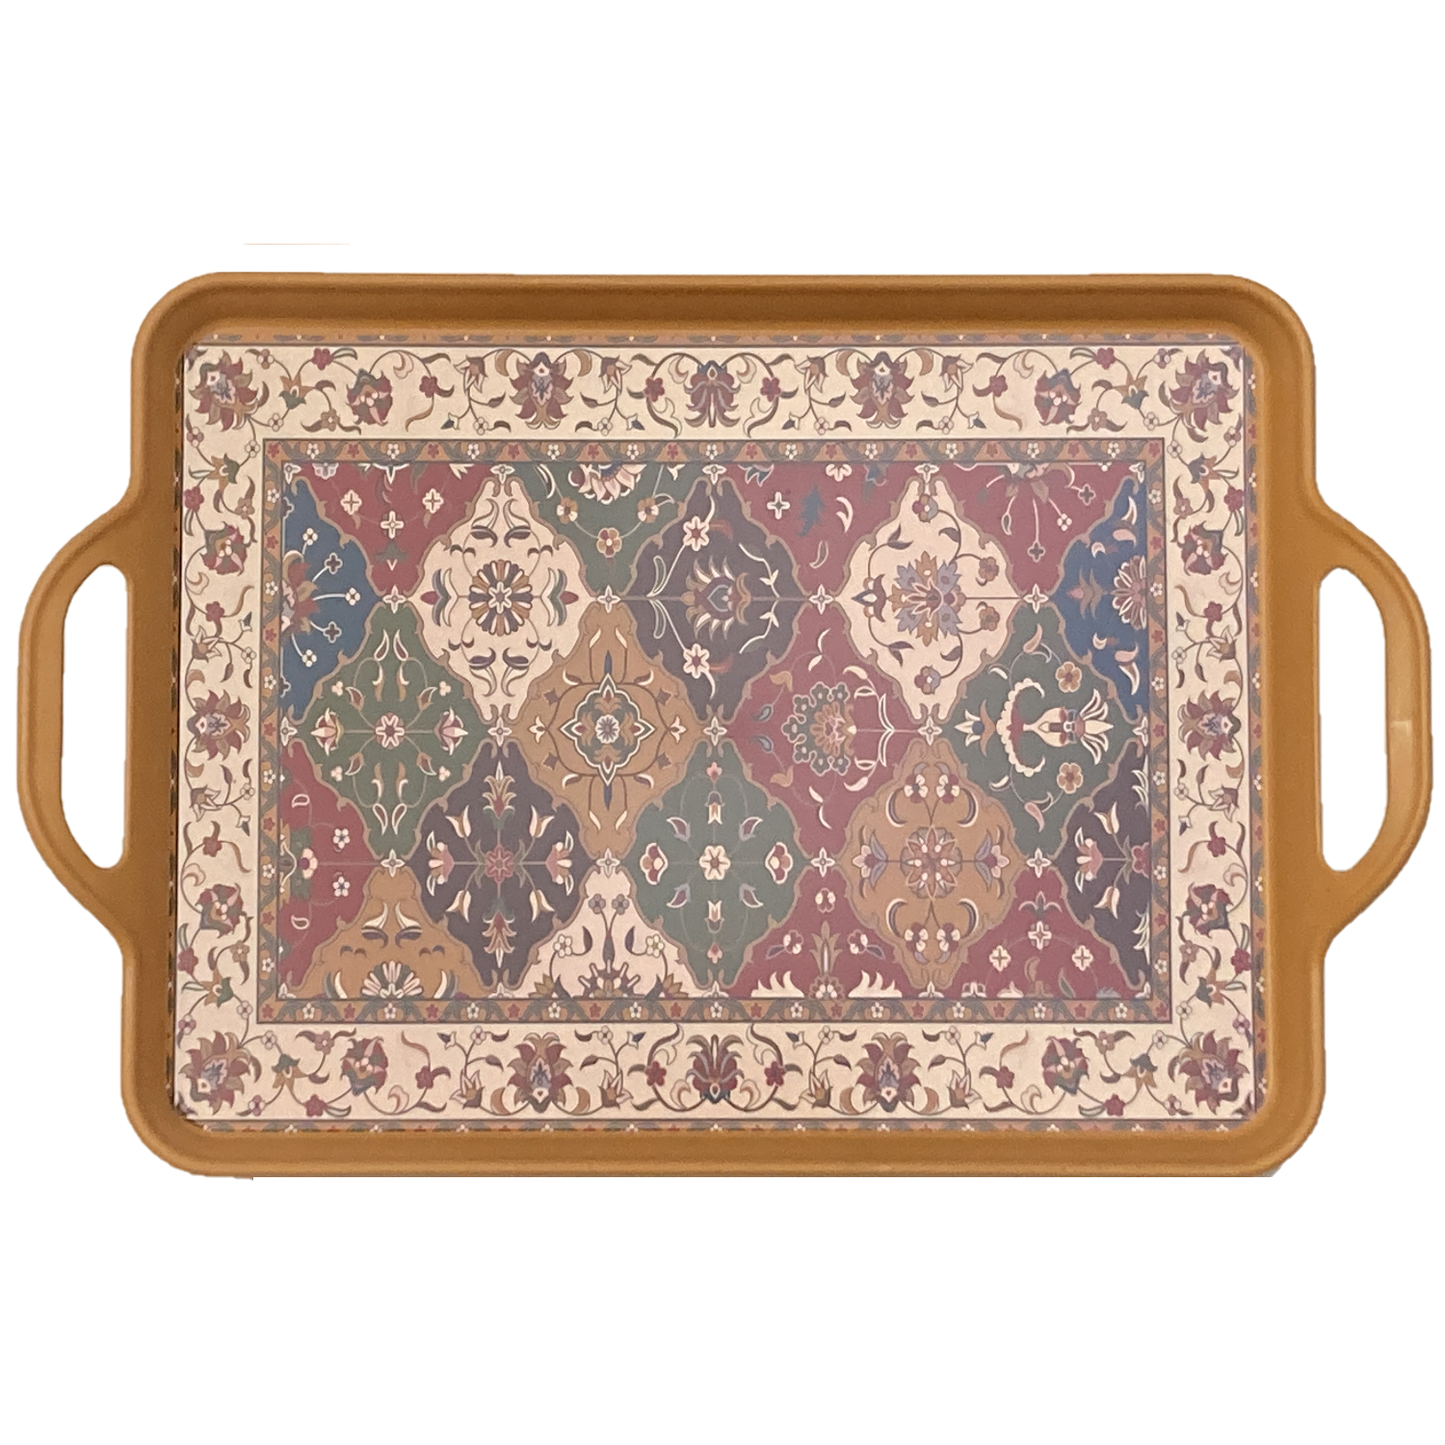 Large Brown Decorative Tray